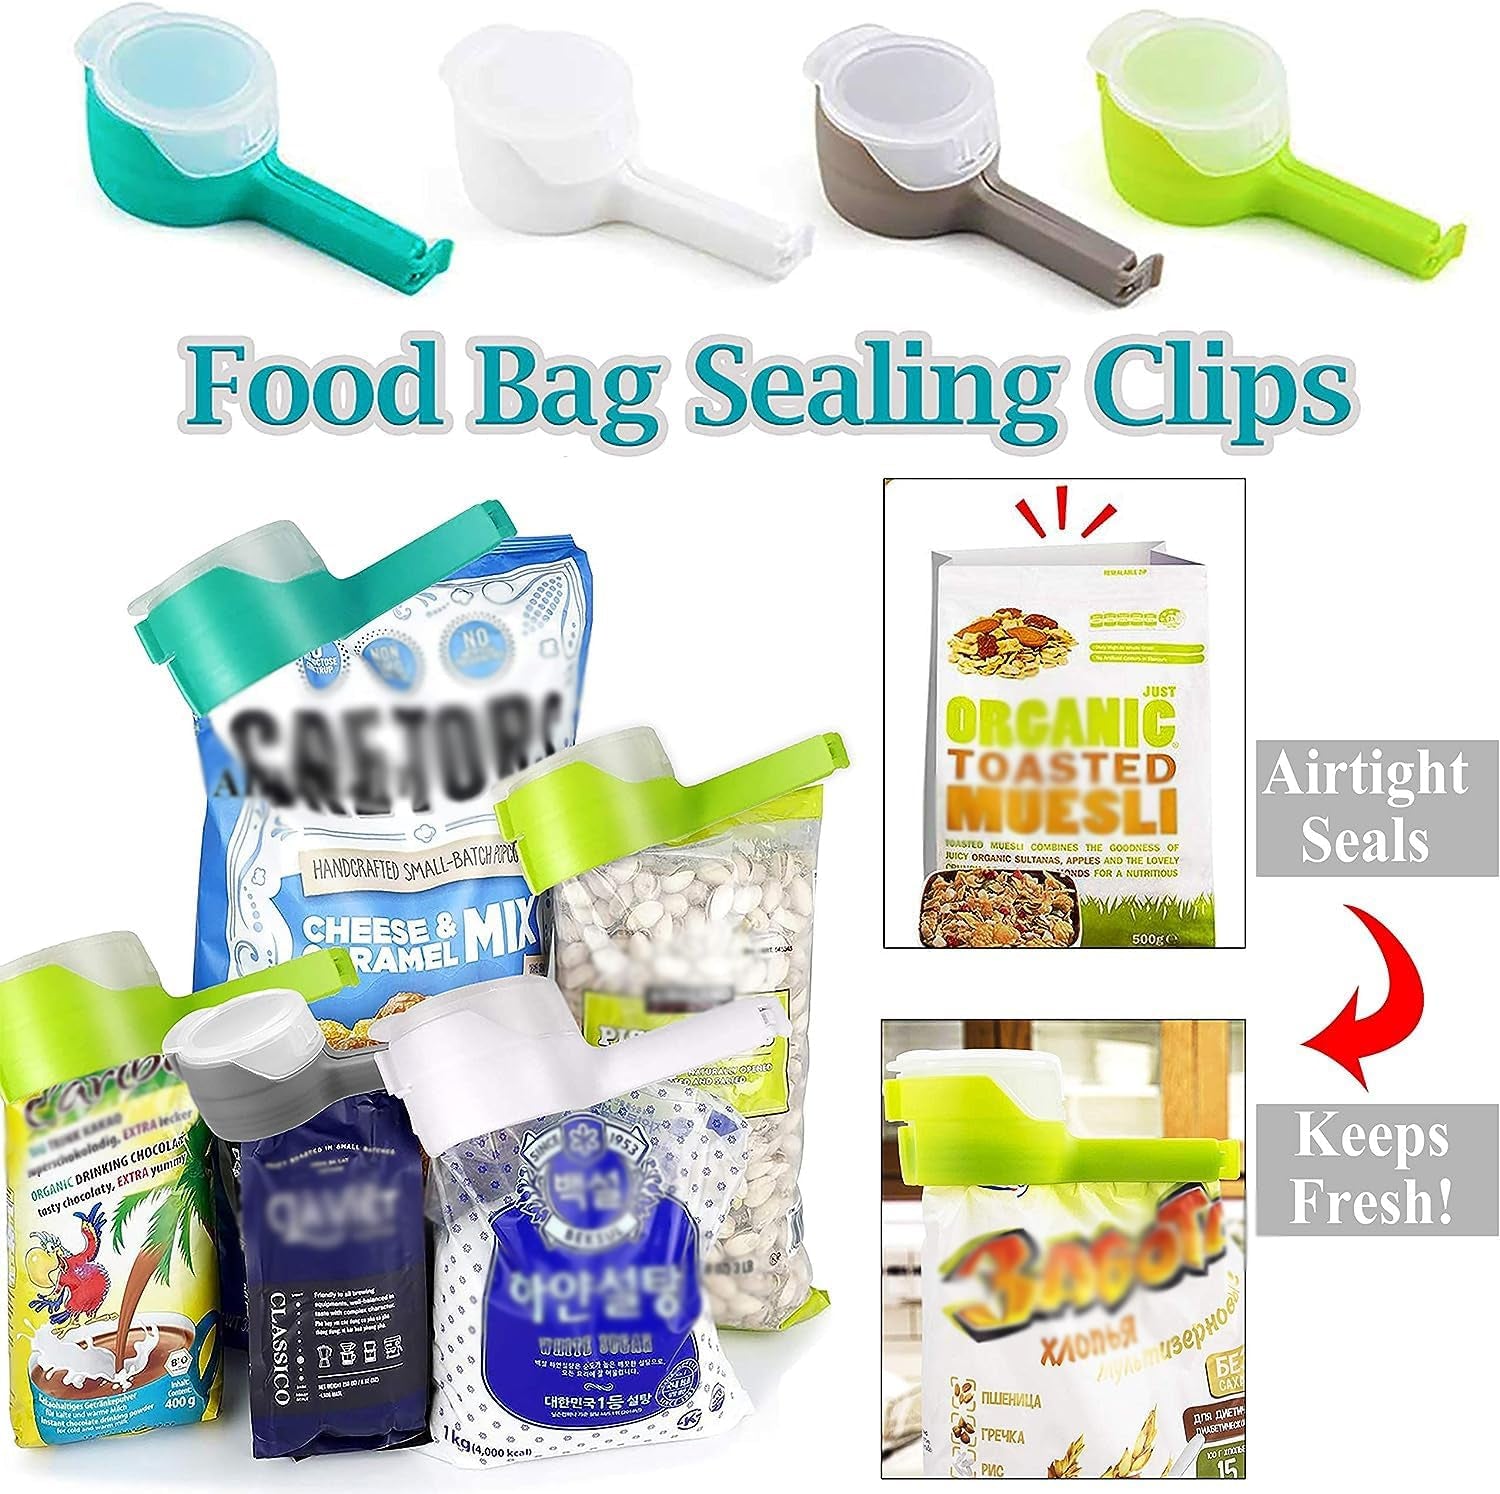 Bag Clips for Food, Food Storage Sealing Clips with Pour Spouts, Kitchen Chip Bag Clips, Plastic Cap Sealer Clips, Great for Kitchen Food Storage and Organization